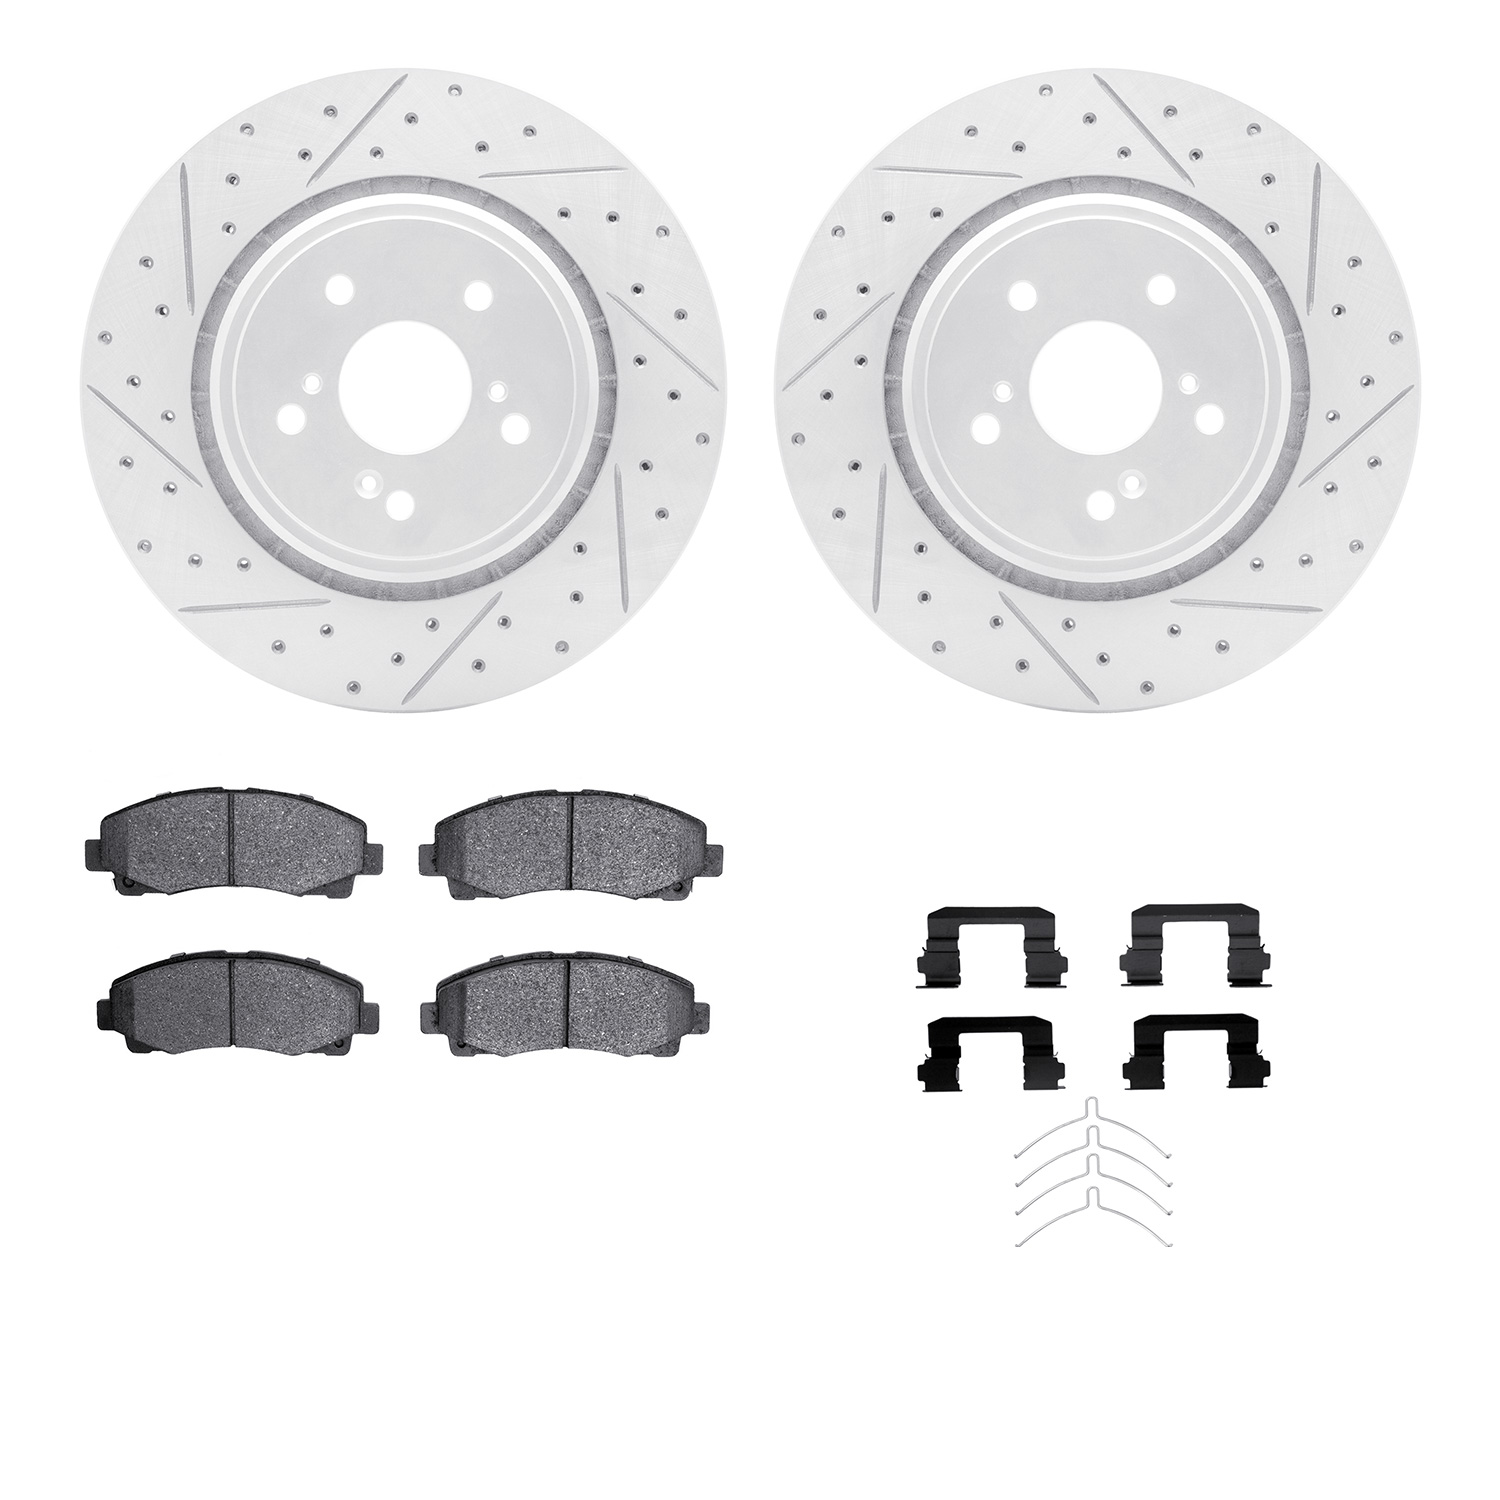 2512-58016 Geoperformance Drilled/Slotted Rotors w/5000 Advanced Brake Pads Kit & Hardware, 2015-2020 Acura/Honda, Position: Fro